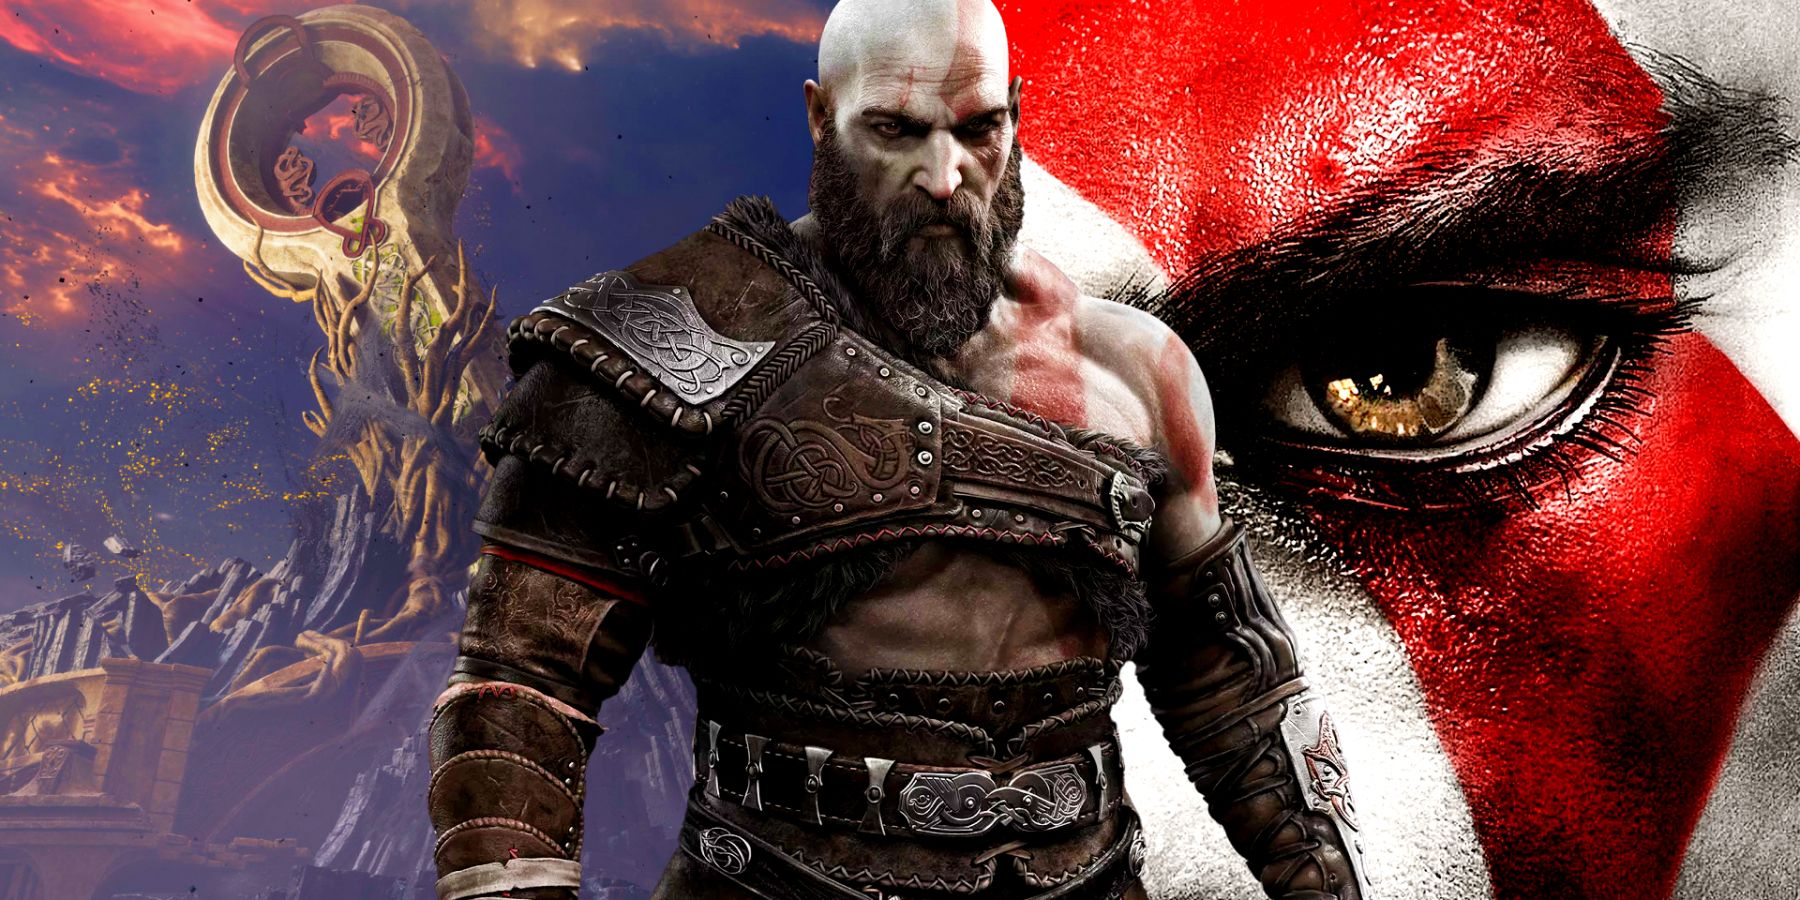 Kratos from God of War Ragnarok standing in front of a split background. On the left is an environment from Valhalla, and on the right is a close-up on Kratos' eye from God of War 3.